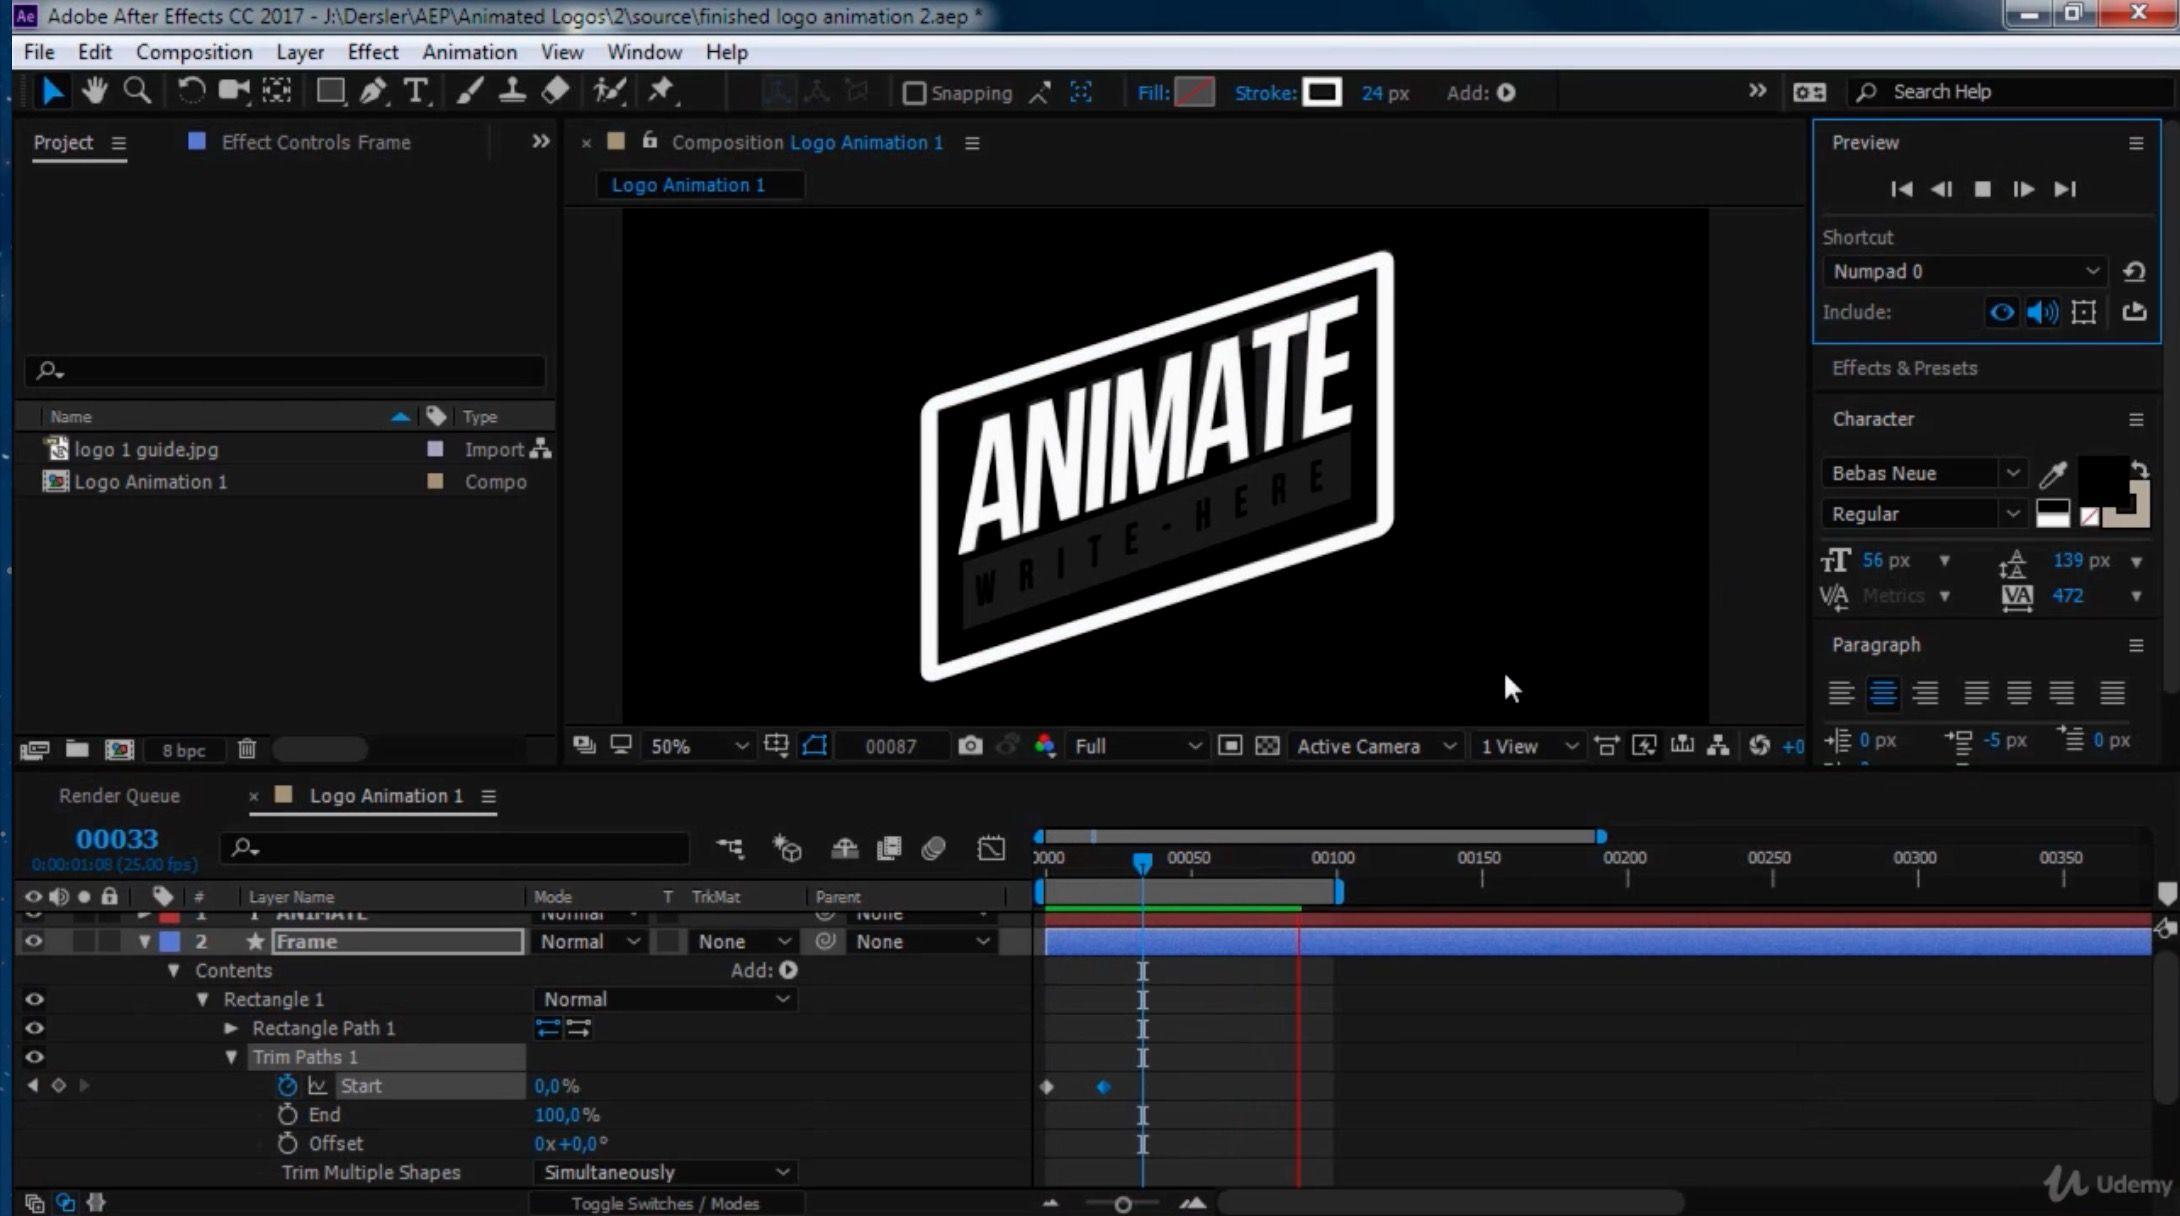 CC Game Logo - After Effects CC: How to Make The Elegant Logo Animation | Review